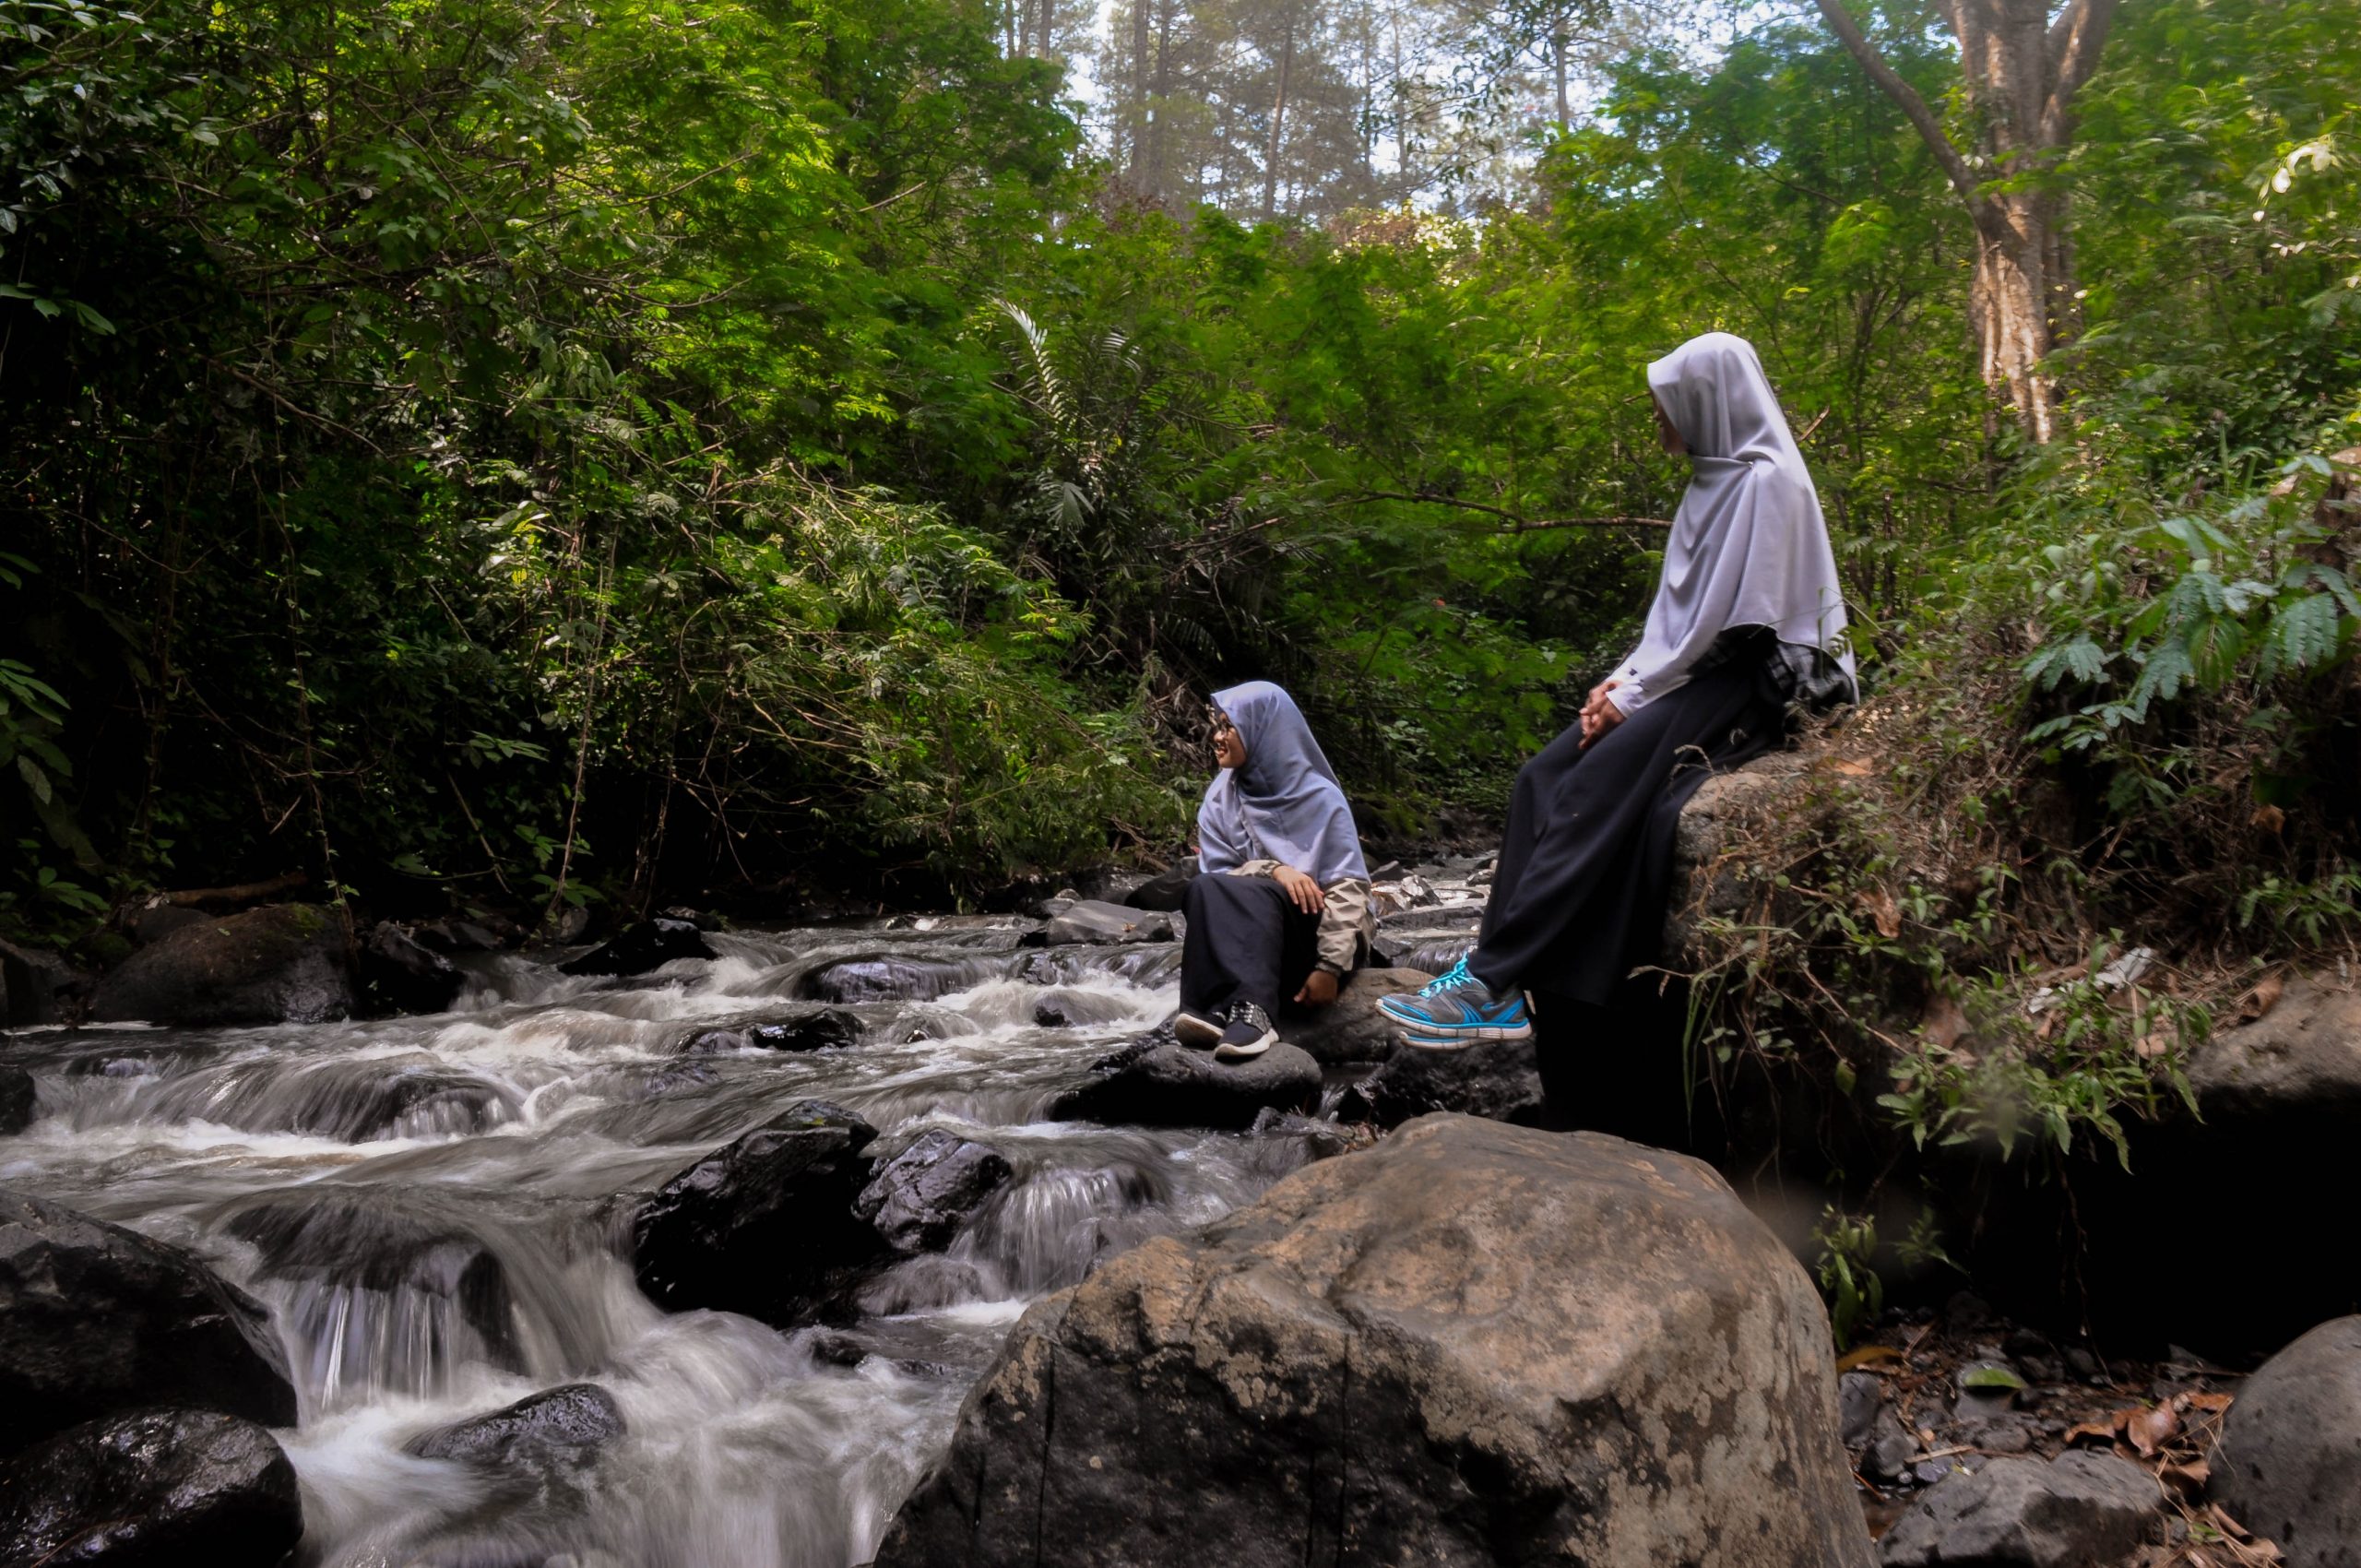 Two young women in hijabs sit by a waterfall.